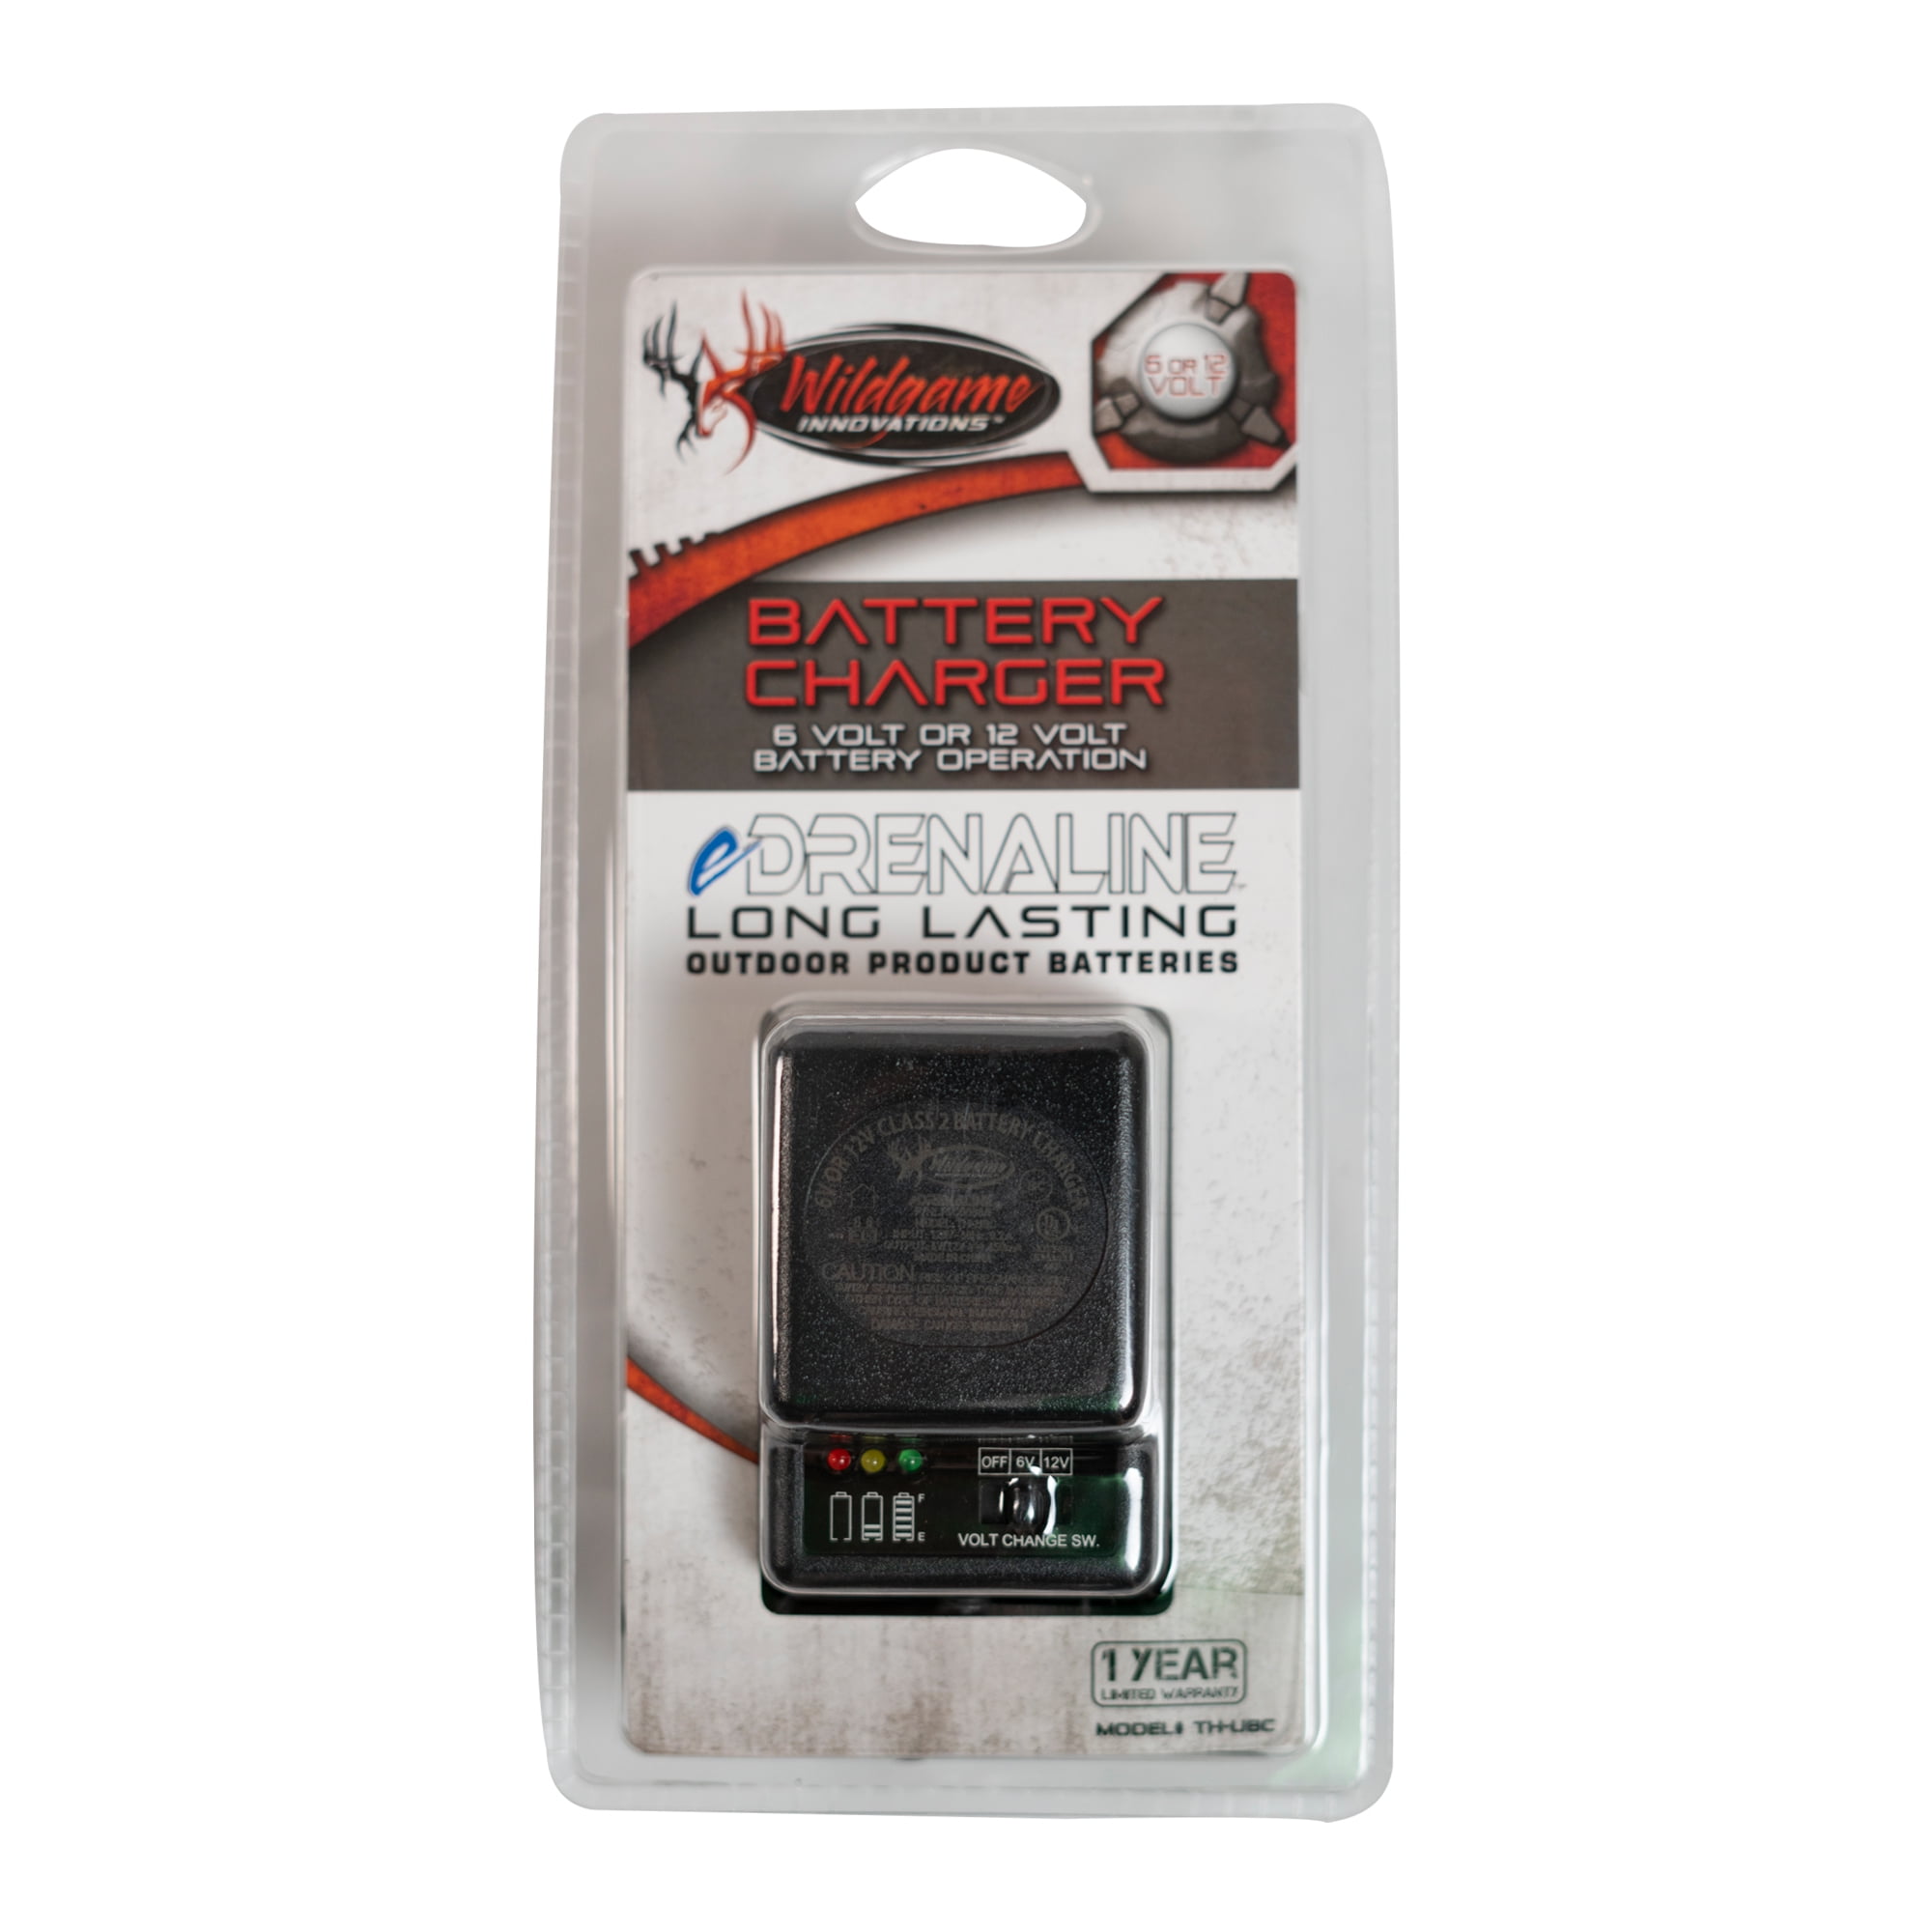 Wildgame Innovations 6 or 12 Volt Battery Charger for sale online 